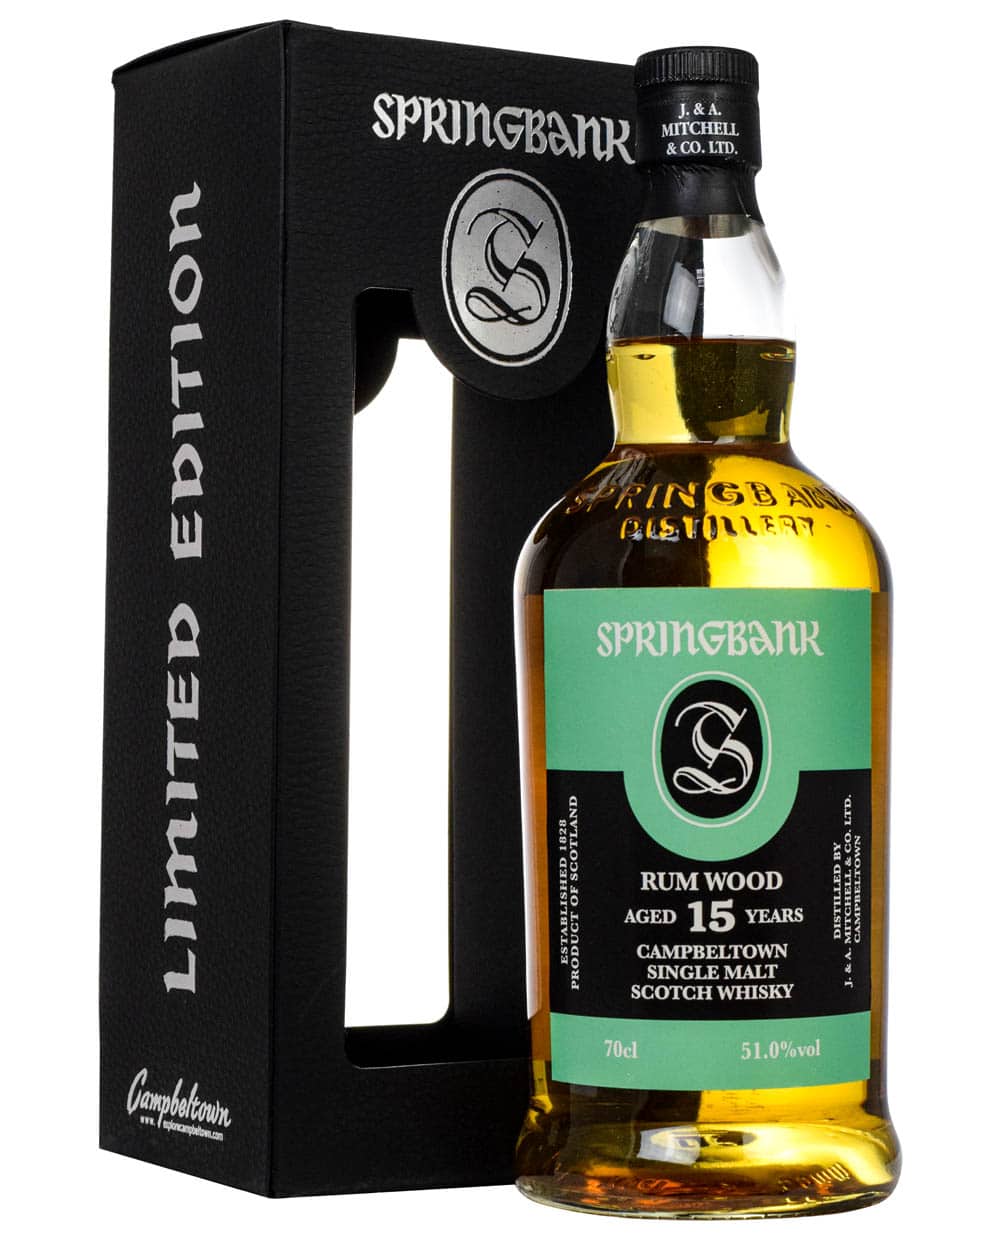 Springbank 15 Years Old Rum Wood 2019 Box Must Have Malts MHM